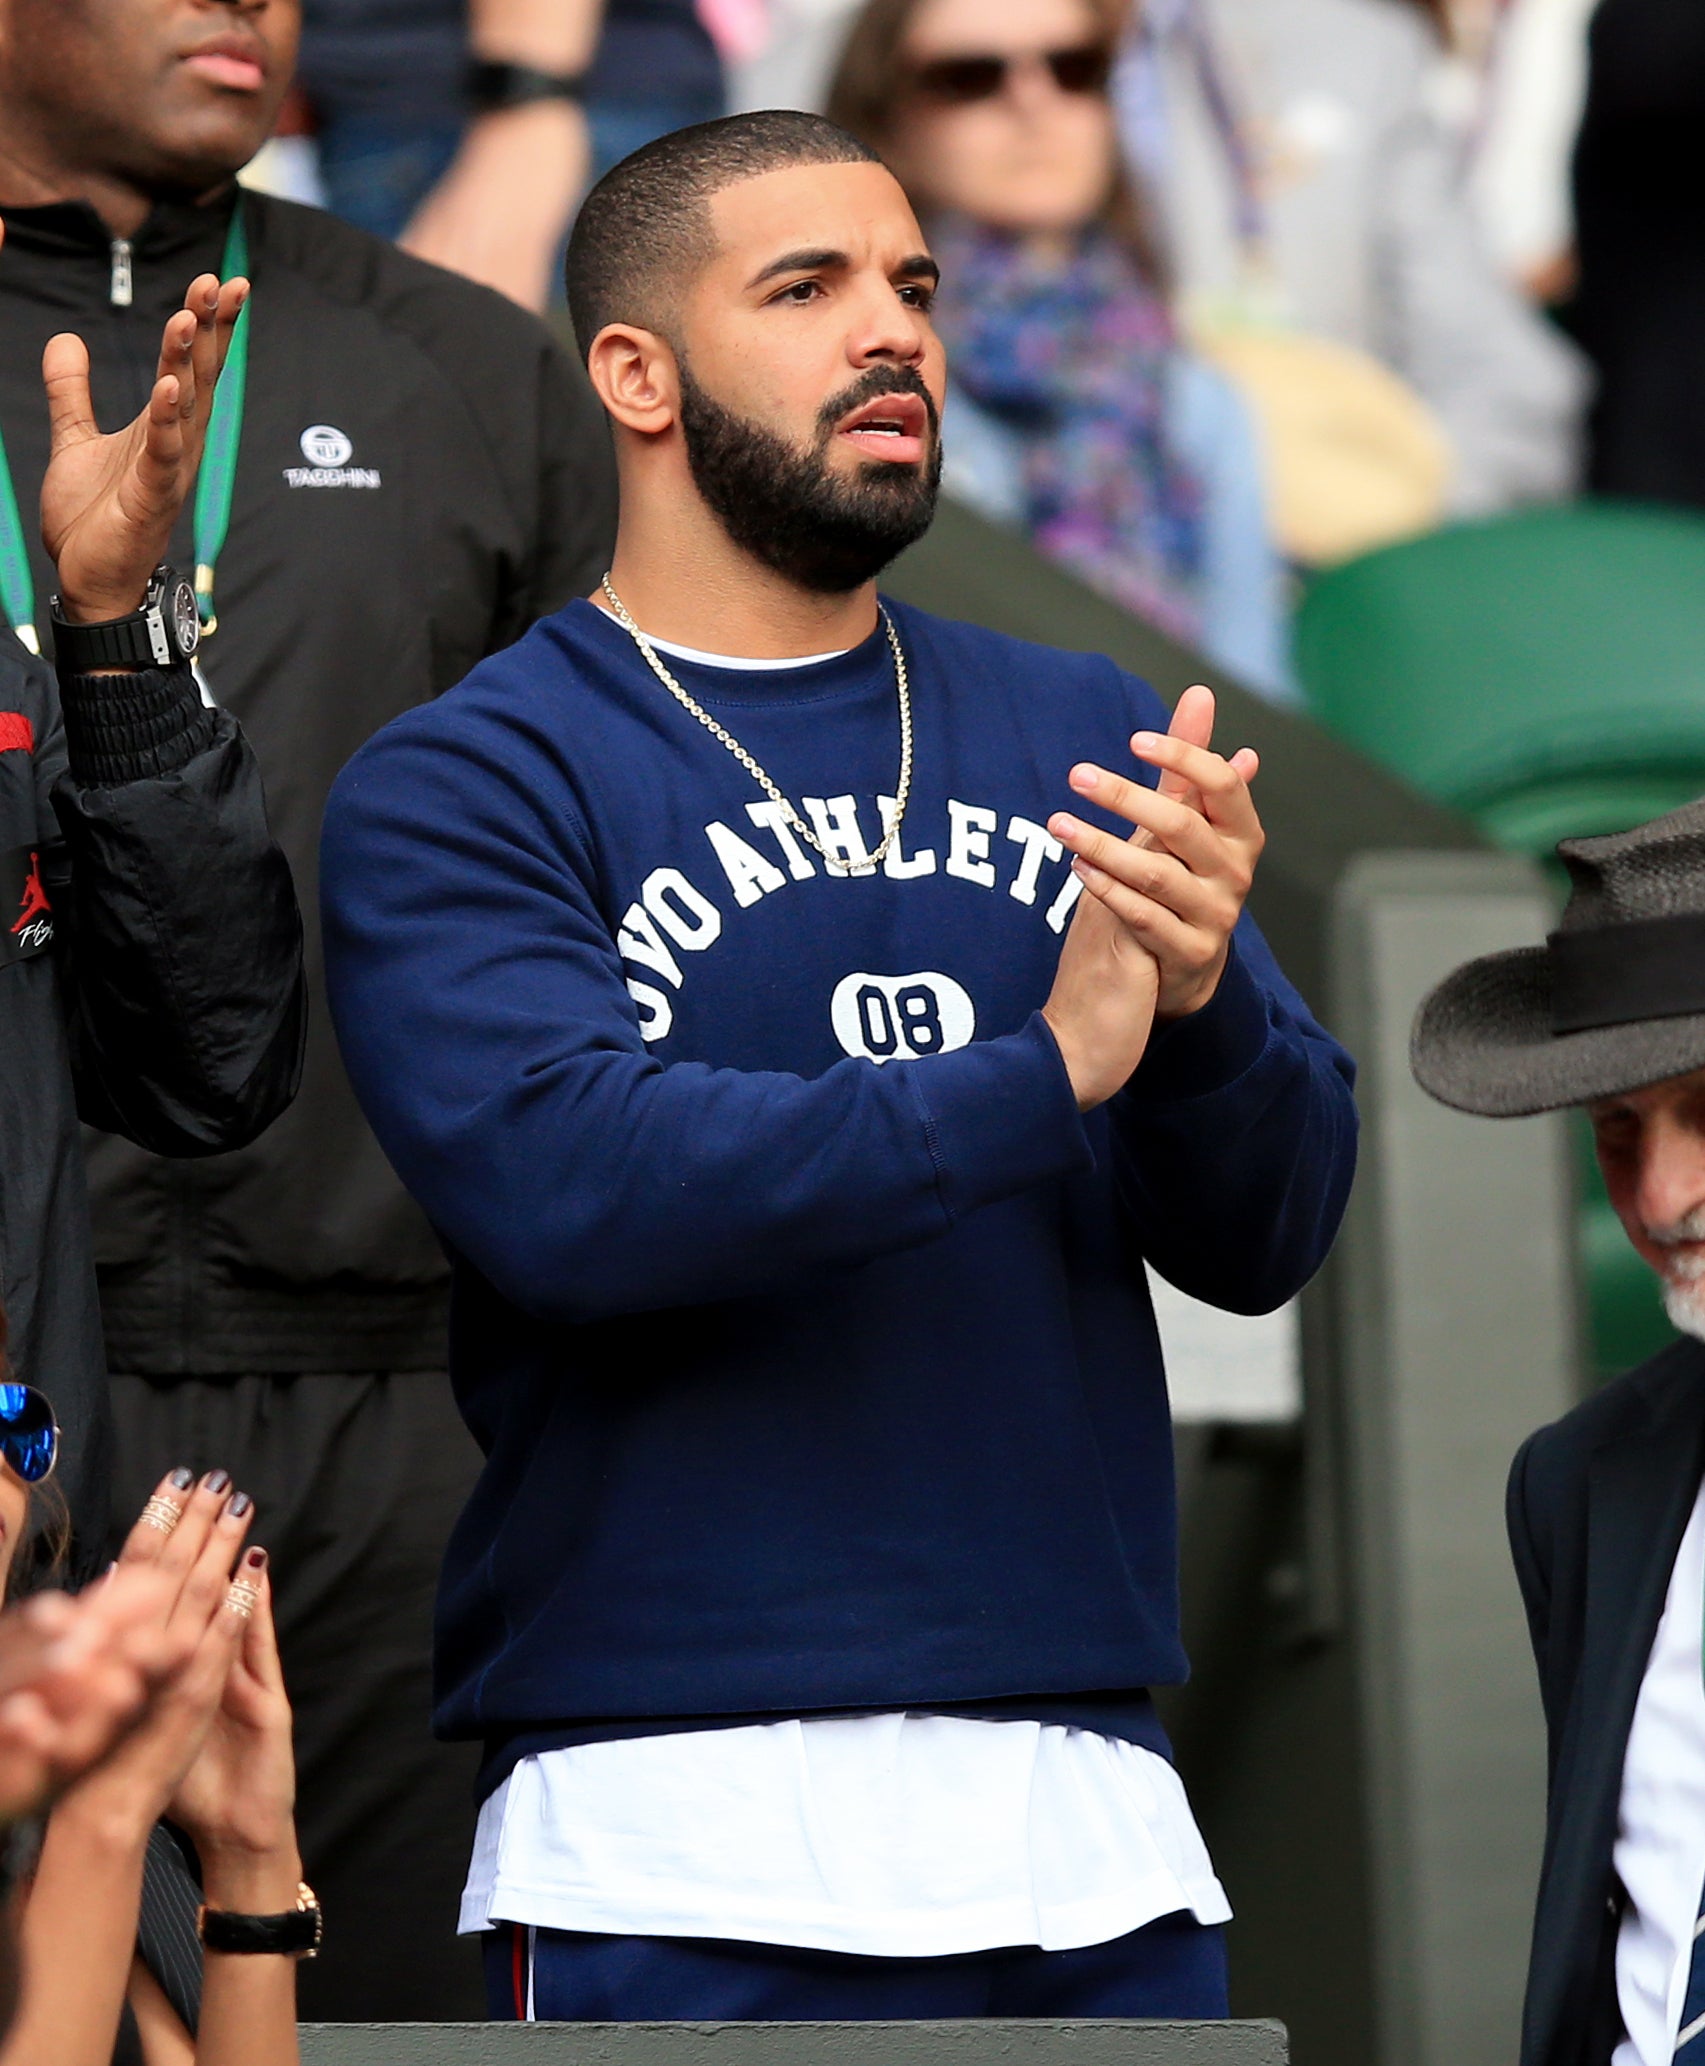 Drake watches a match between Serena Williams and Victoria Azarenka in 2015 (Mike Egerton/PA)